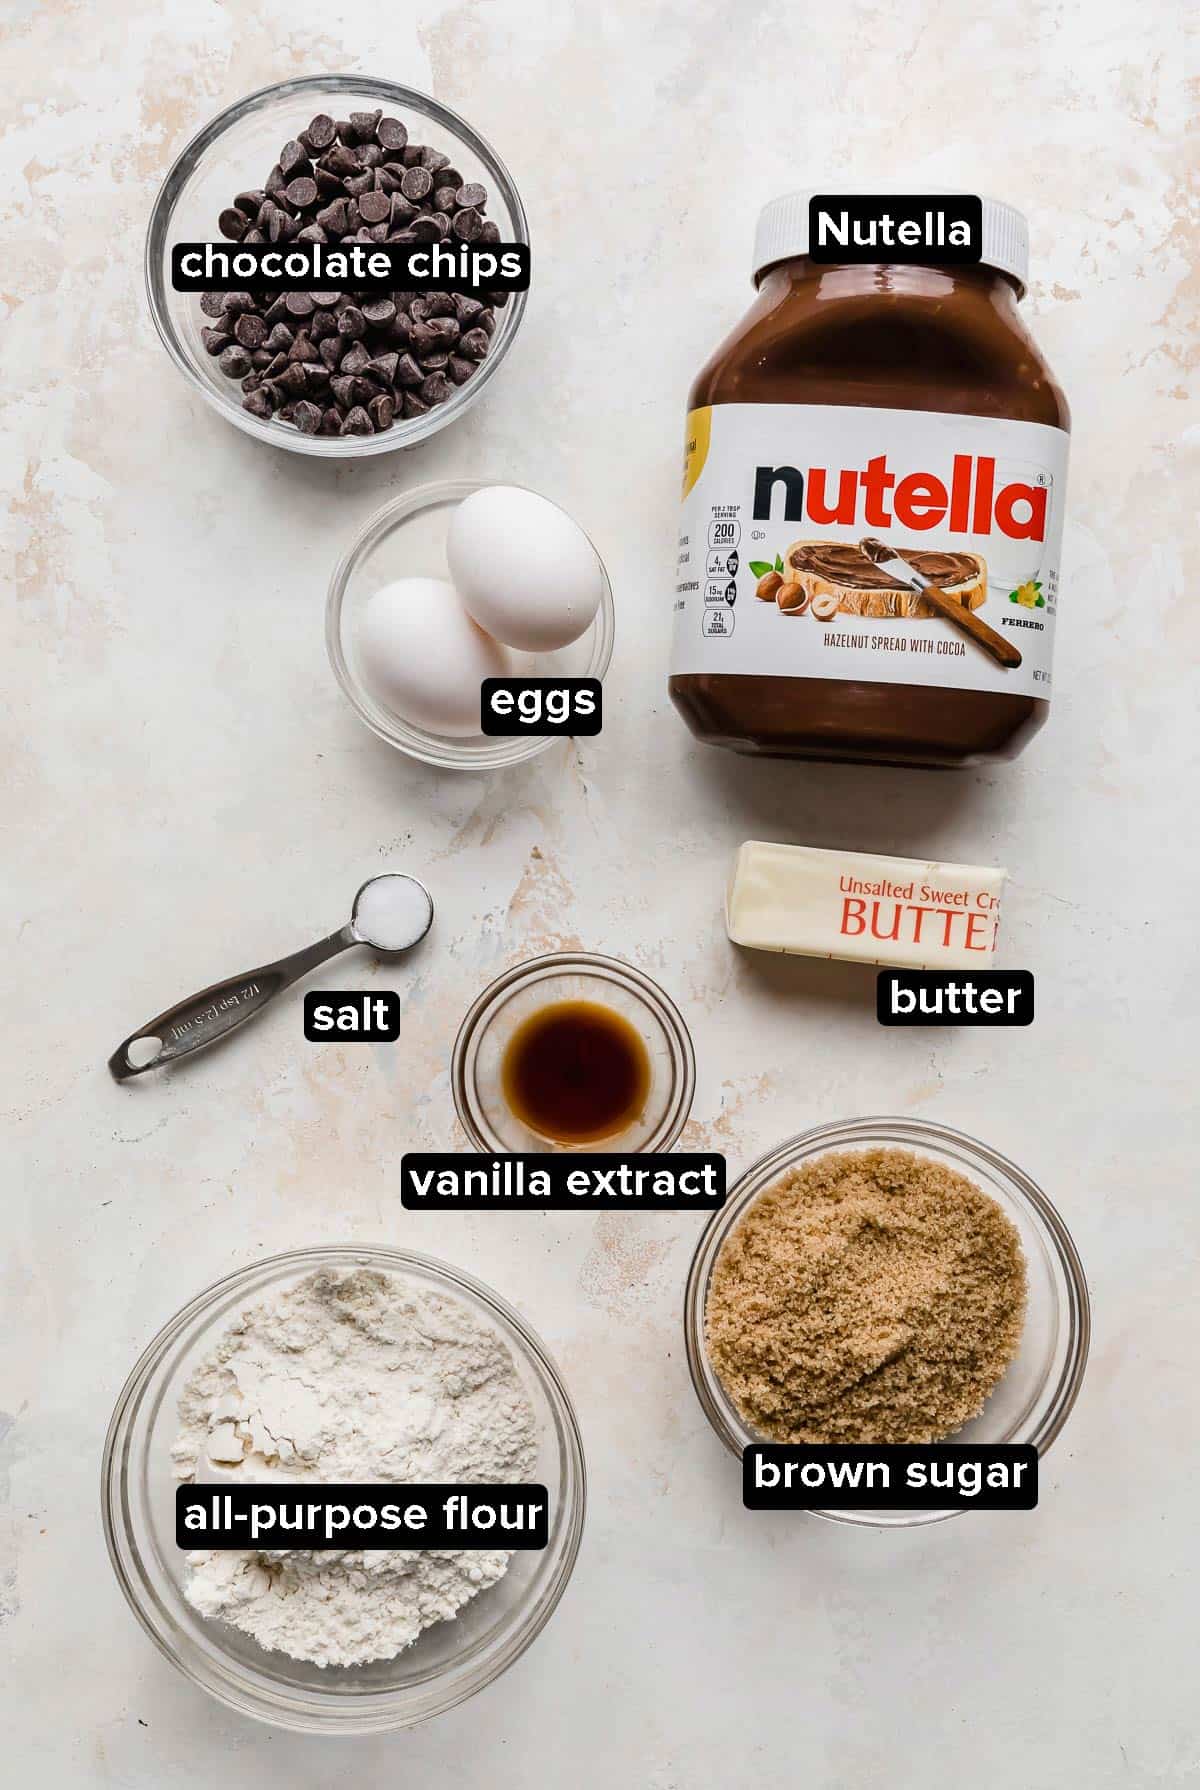 Nutella Brownie ingredients laid out on a white textured background.